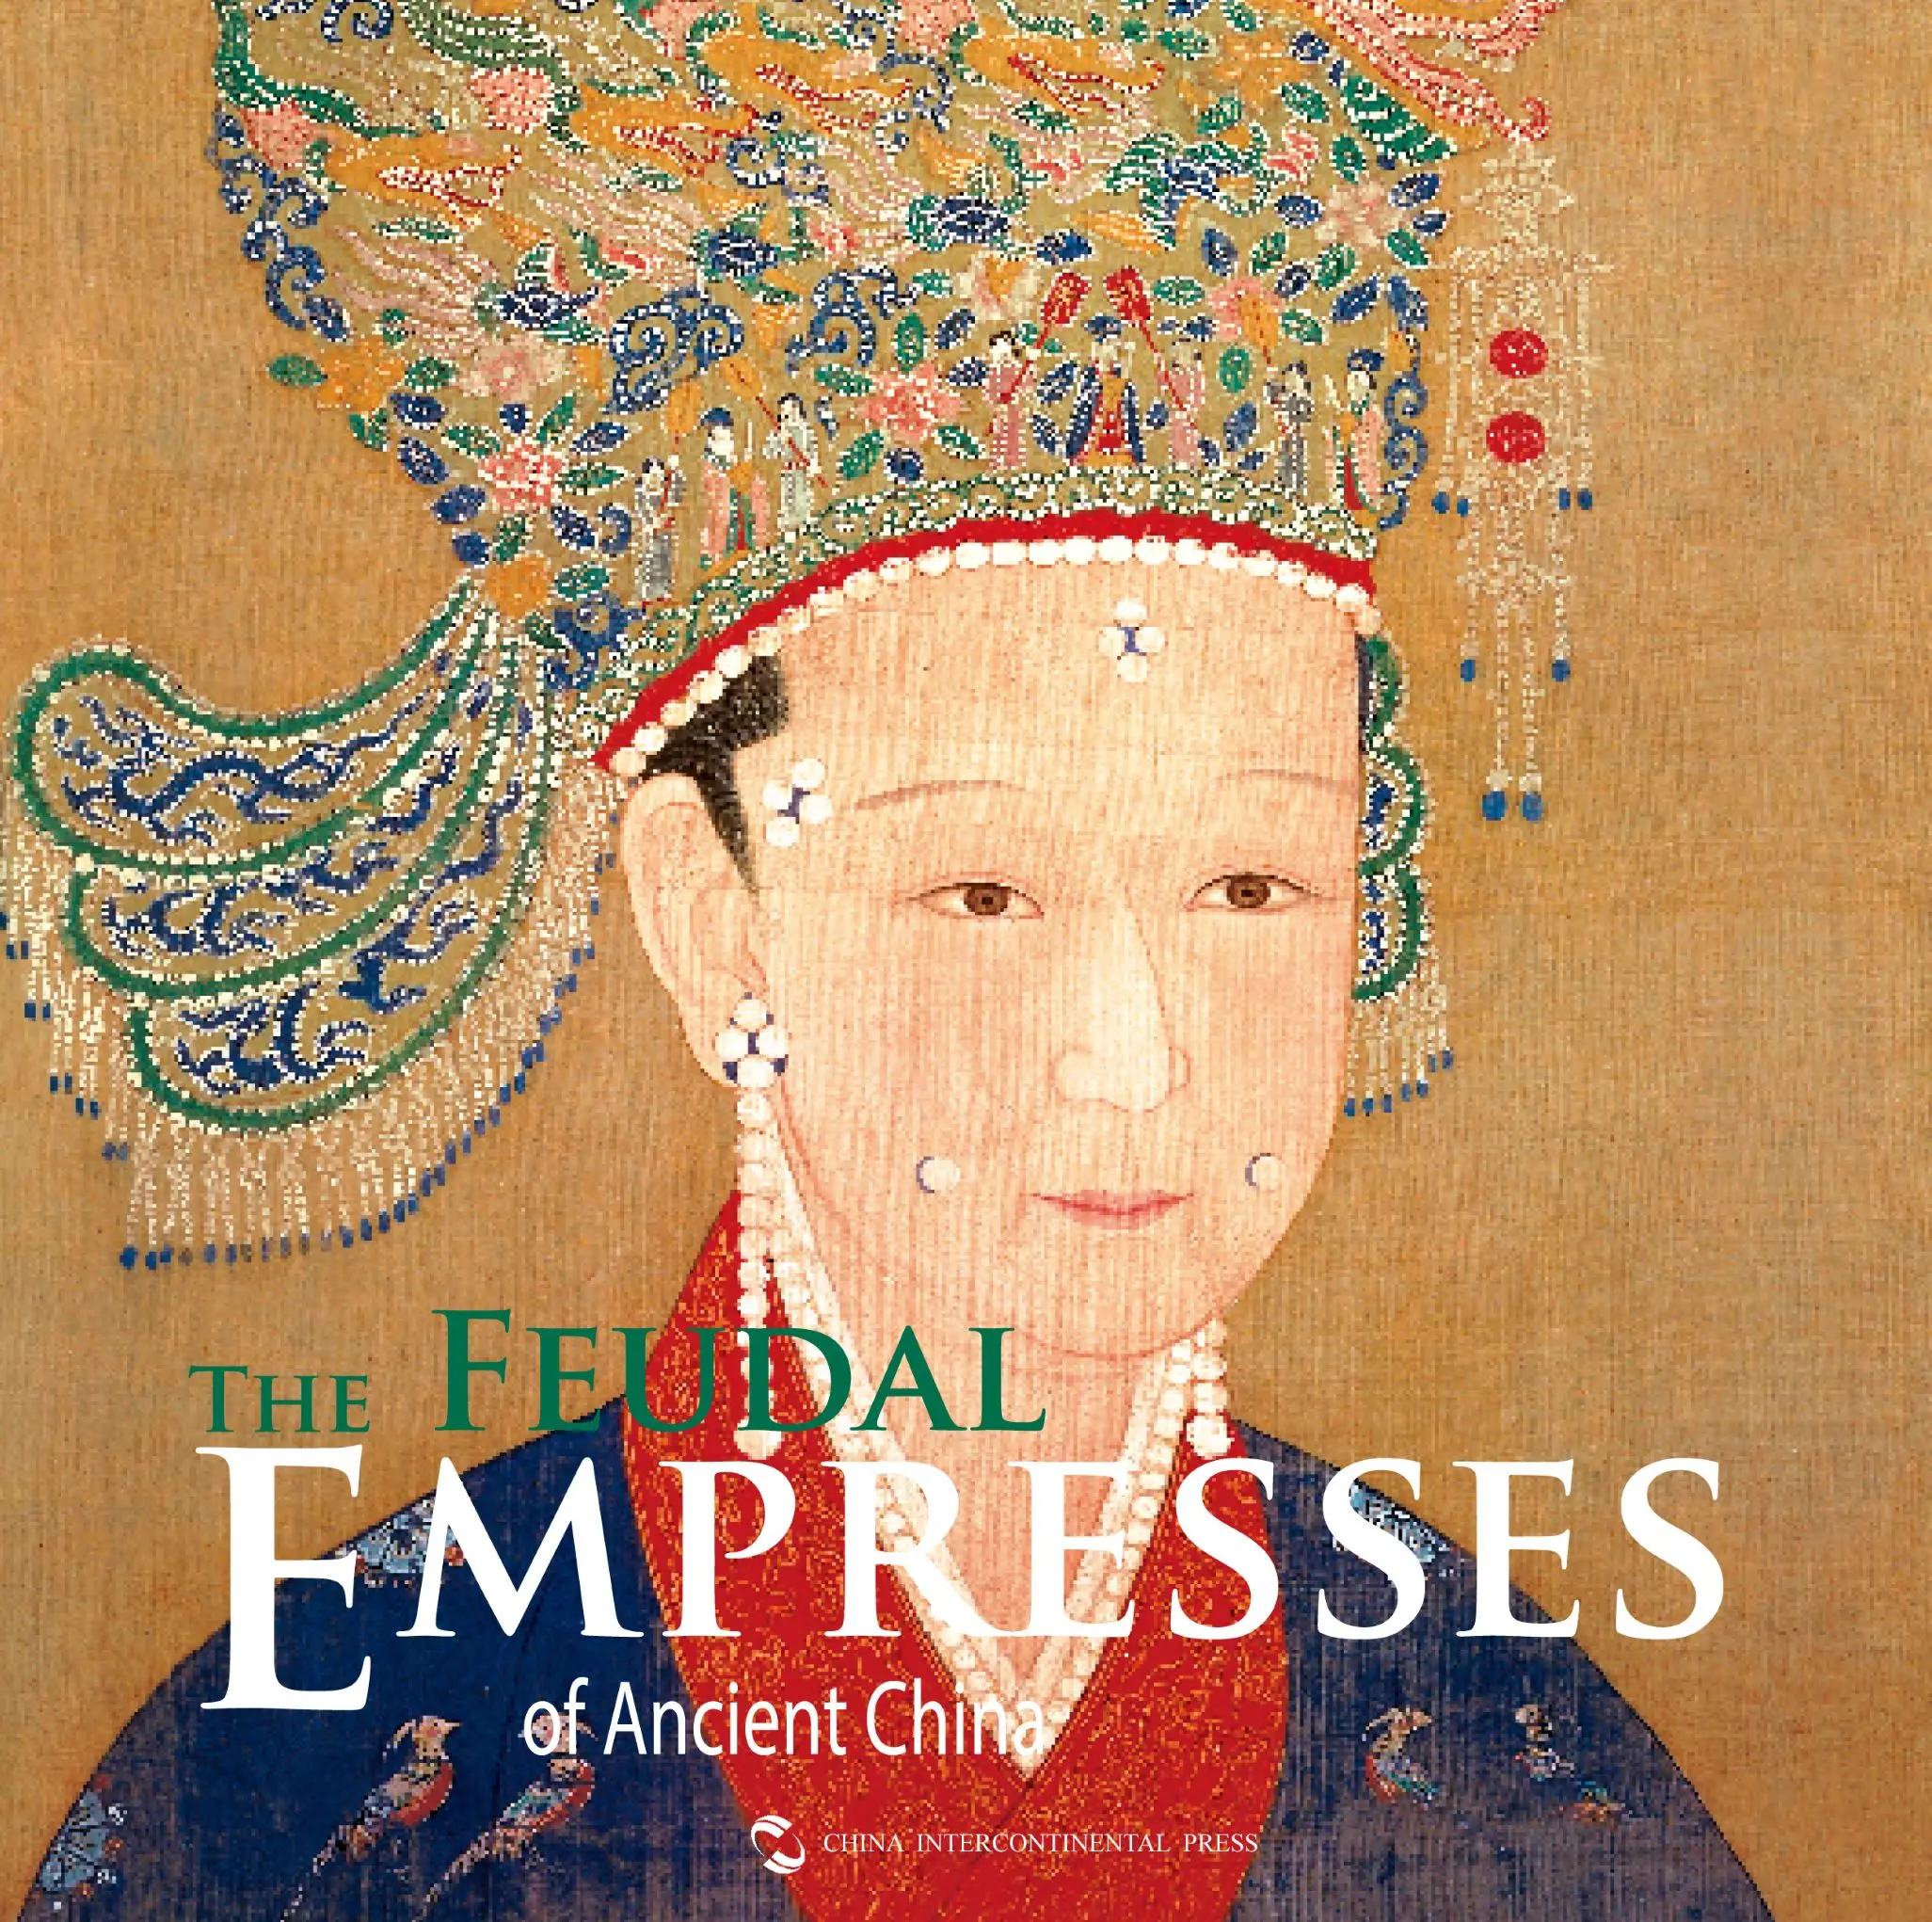 The Feudal Empresses of Ancient China